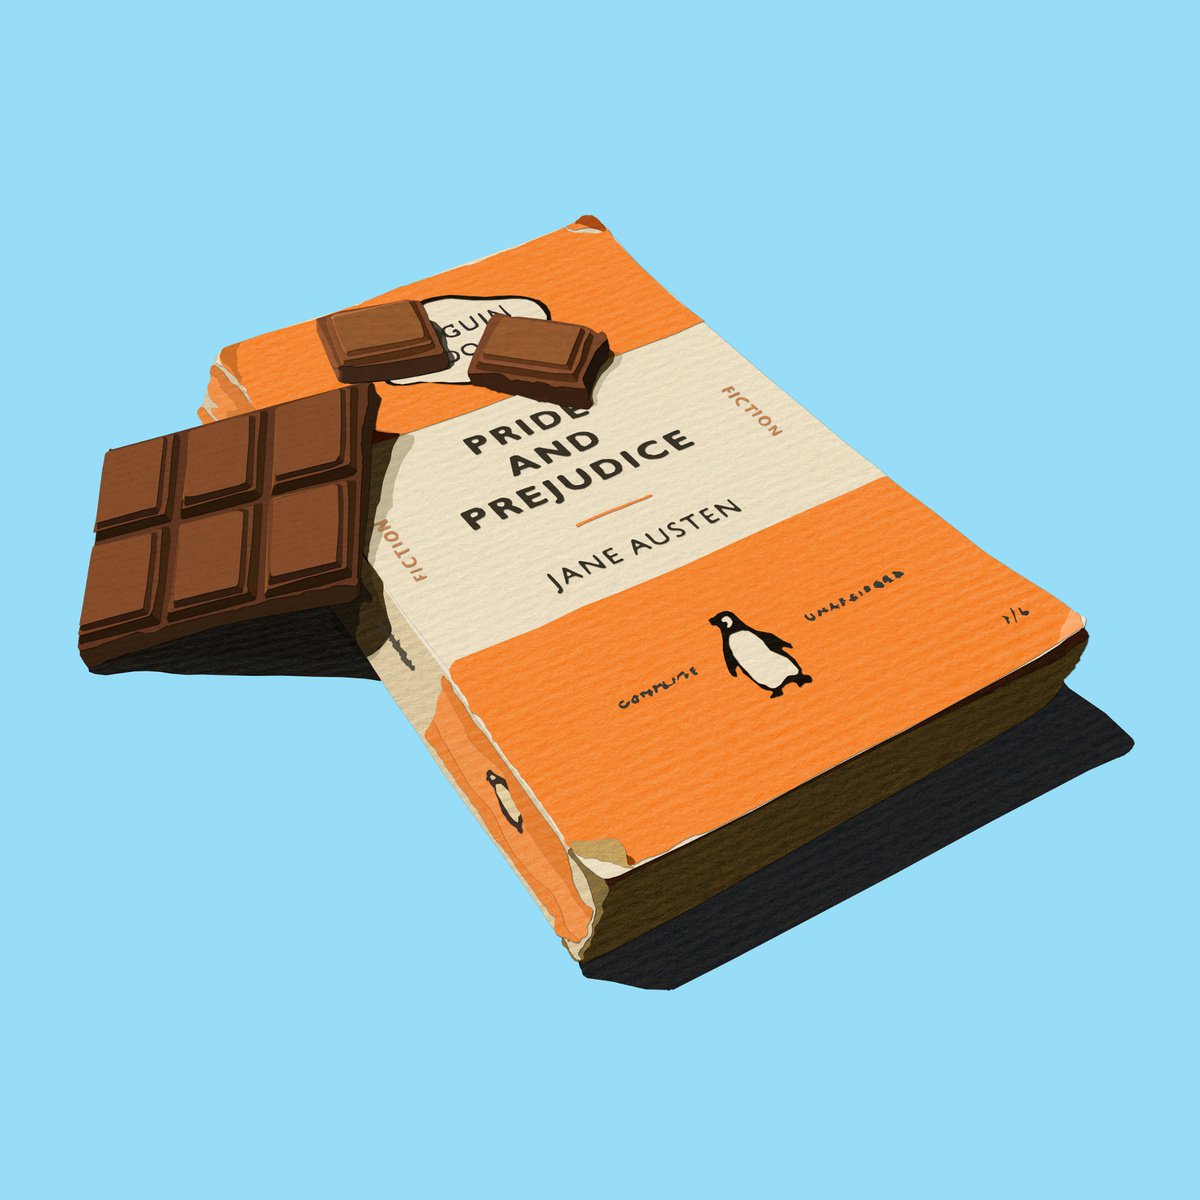 Chocolate with Austen by Peter Walters